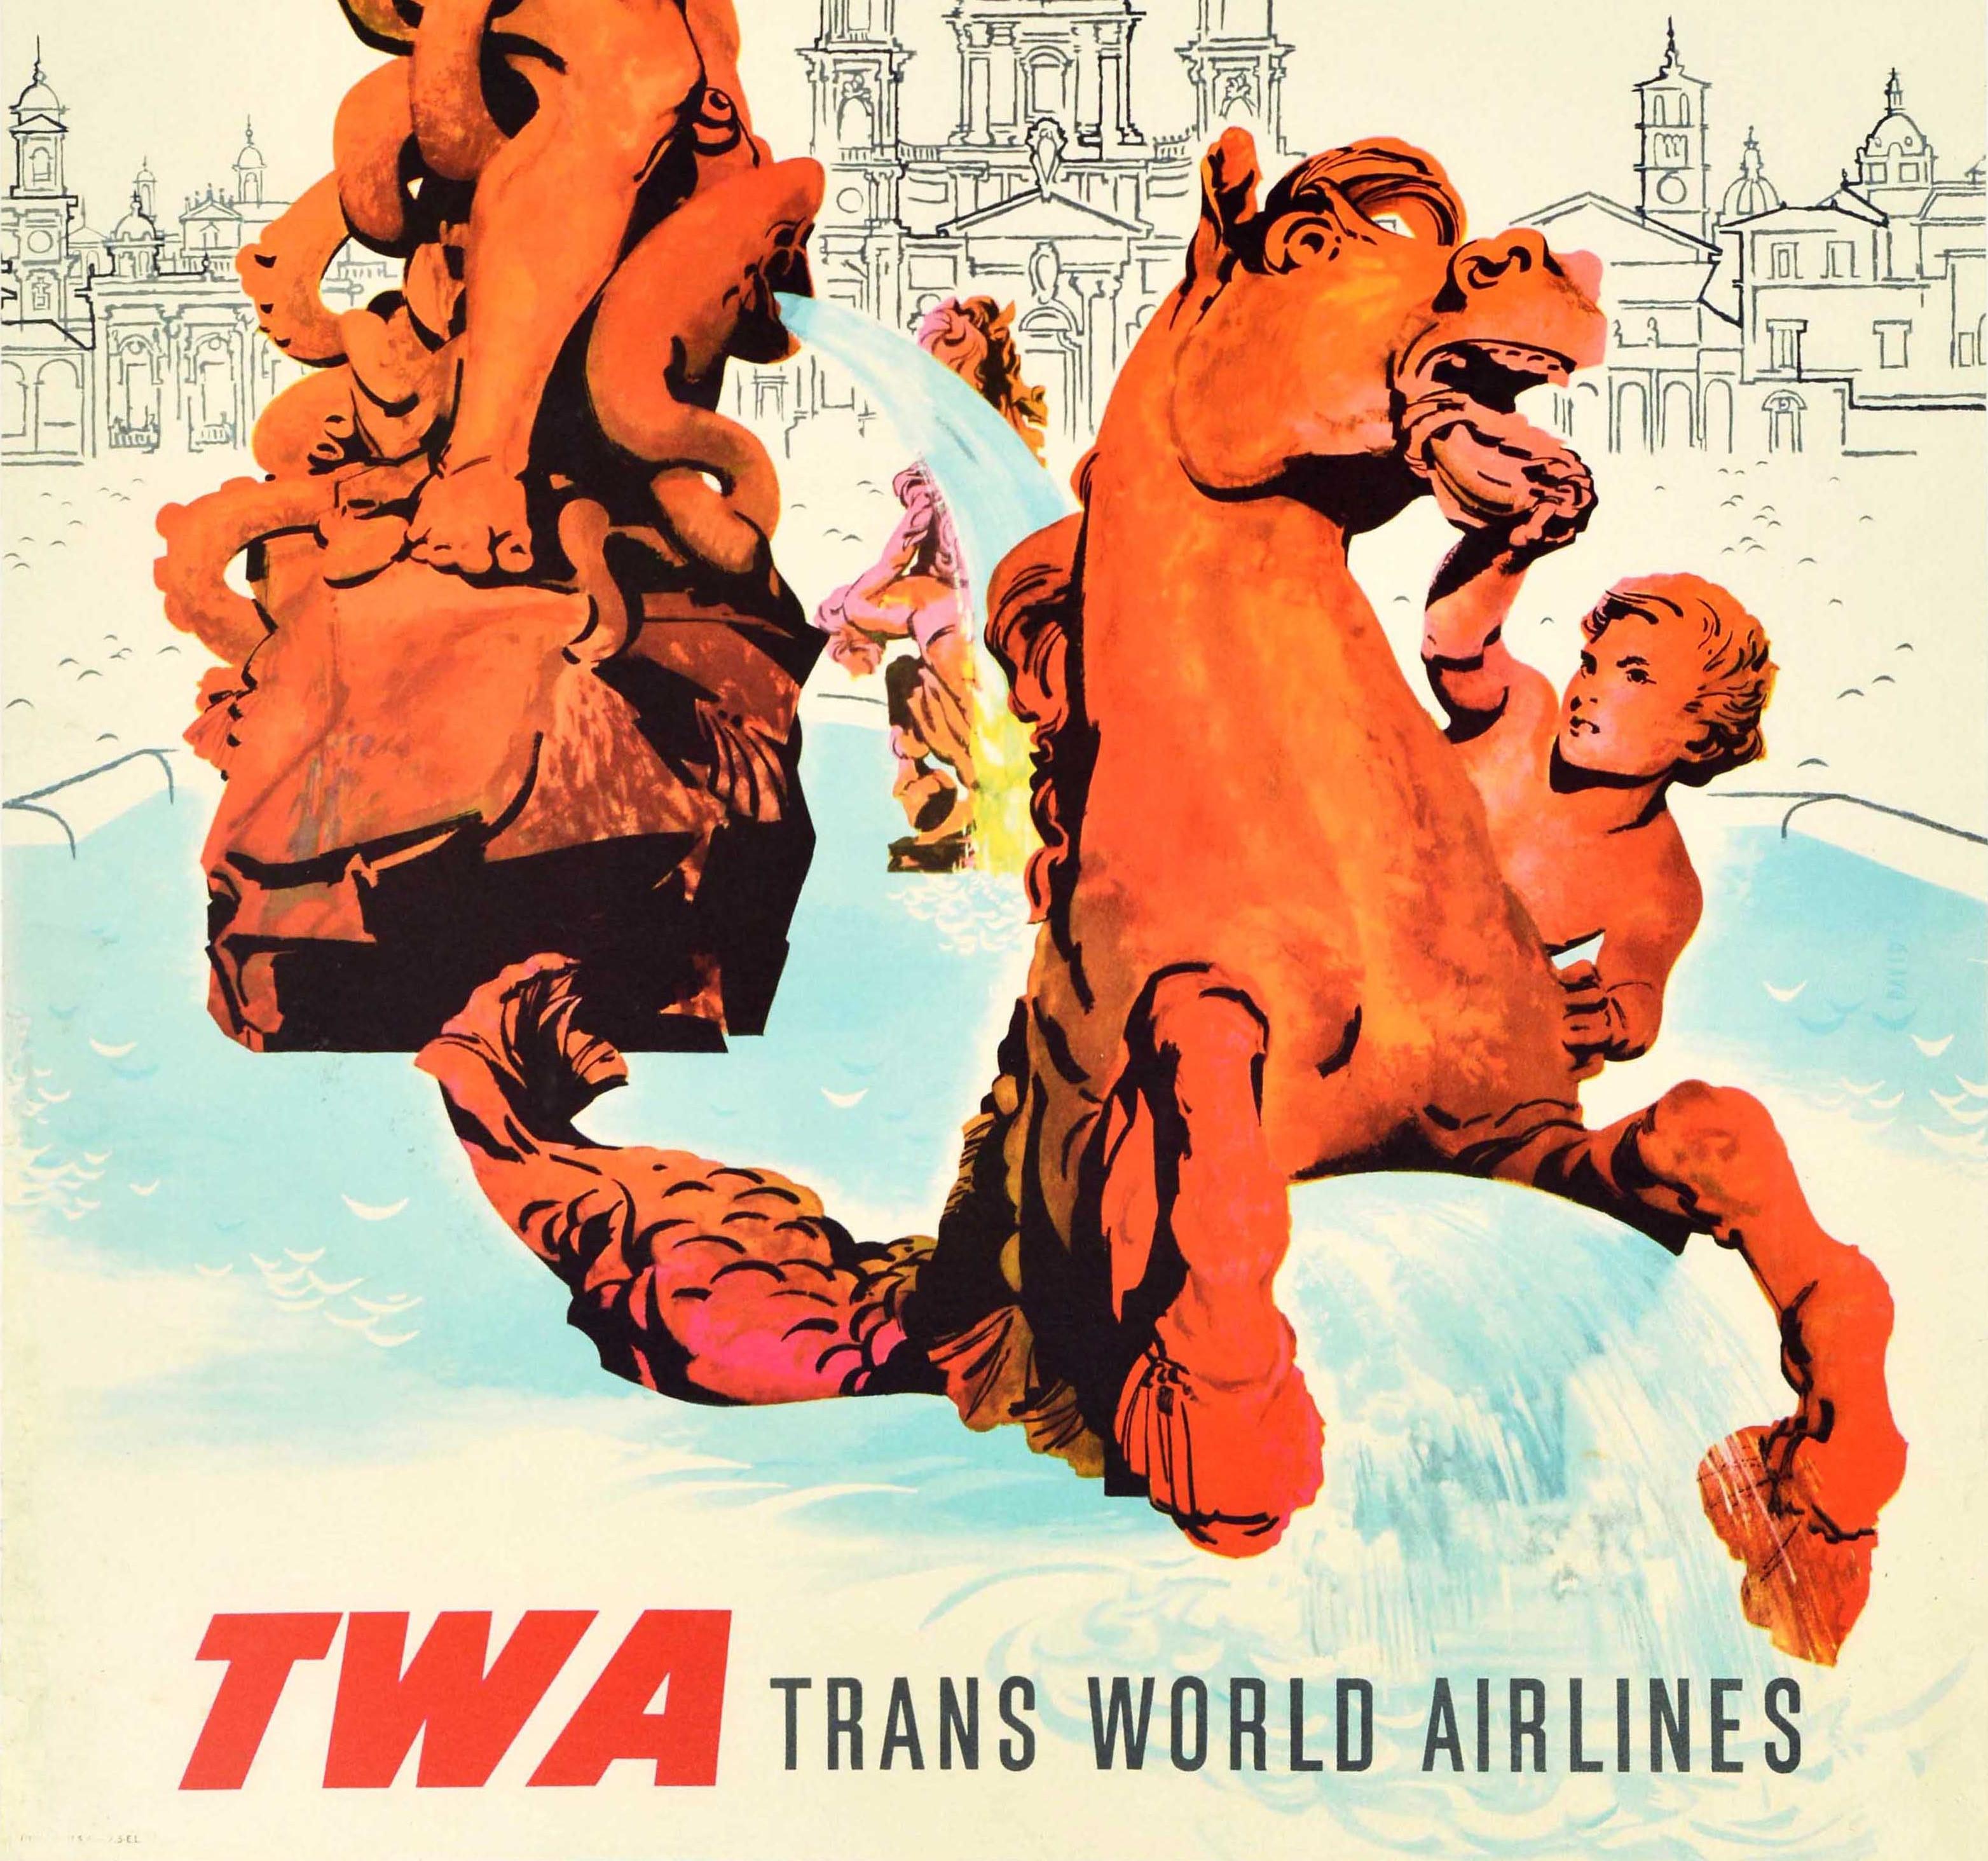 Original vintage travel advertising poster for Rome via TWA Trans World Airlines featuring a colourful design by the notable American artist David Klein (1918-2005) depicting the historic Fountain of Neptune / Fontana del Nettuno in the foreground